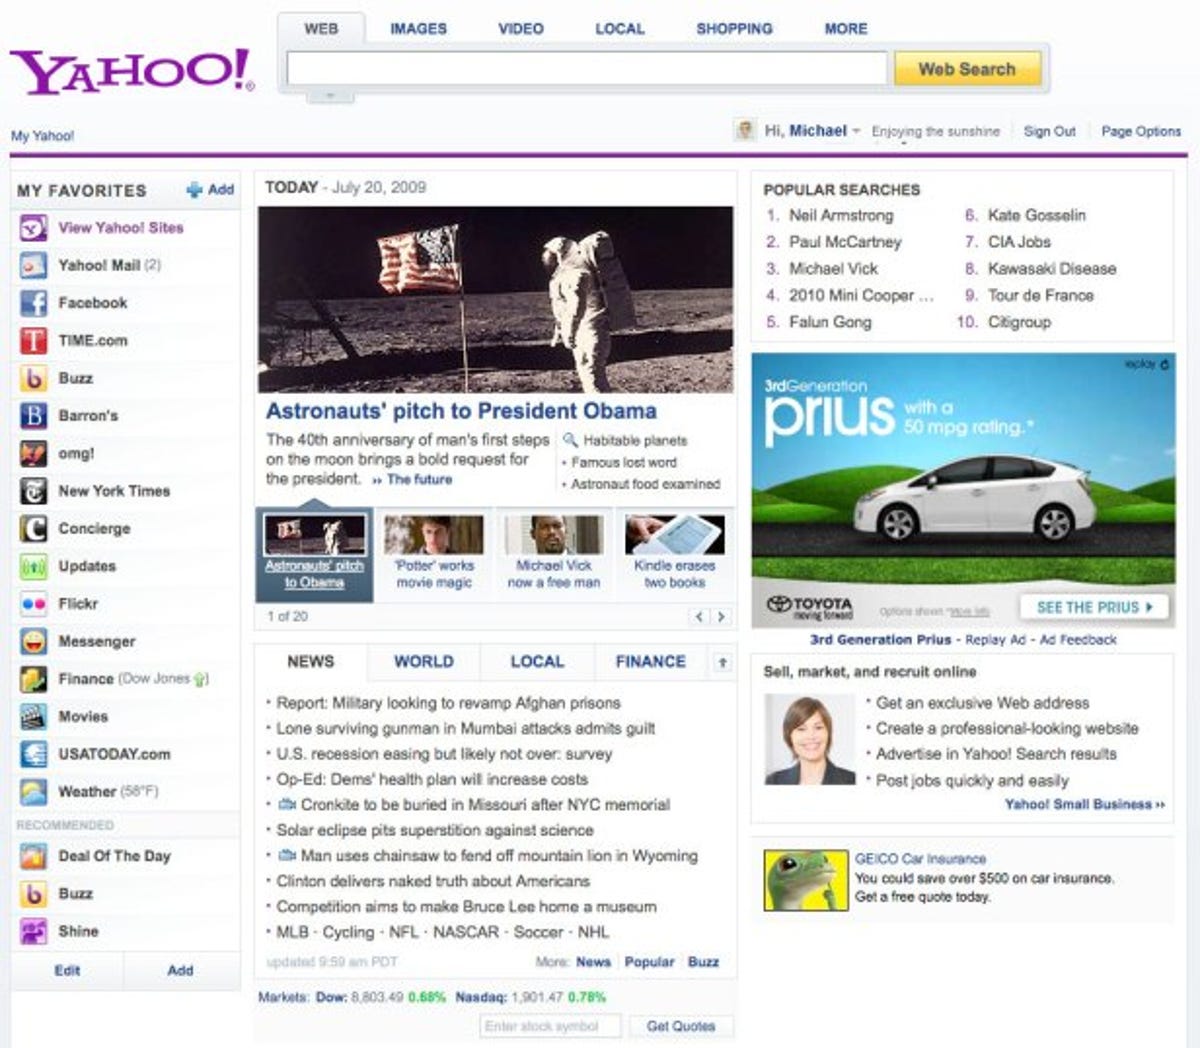 Yahoo's revamped front page.